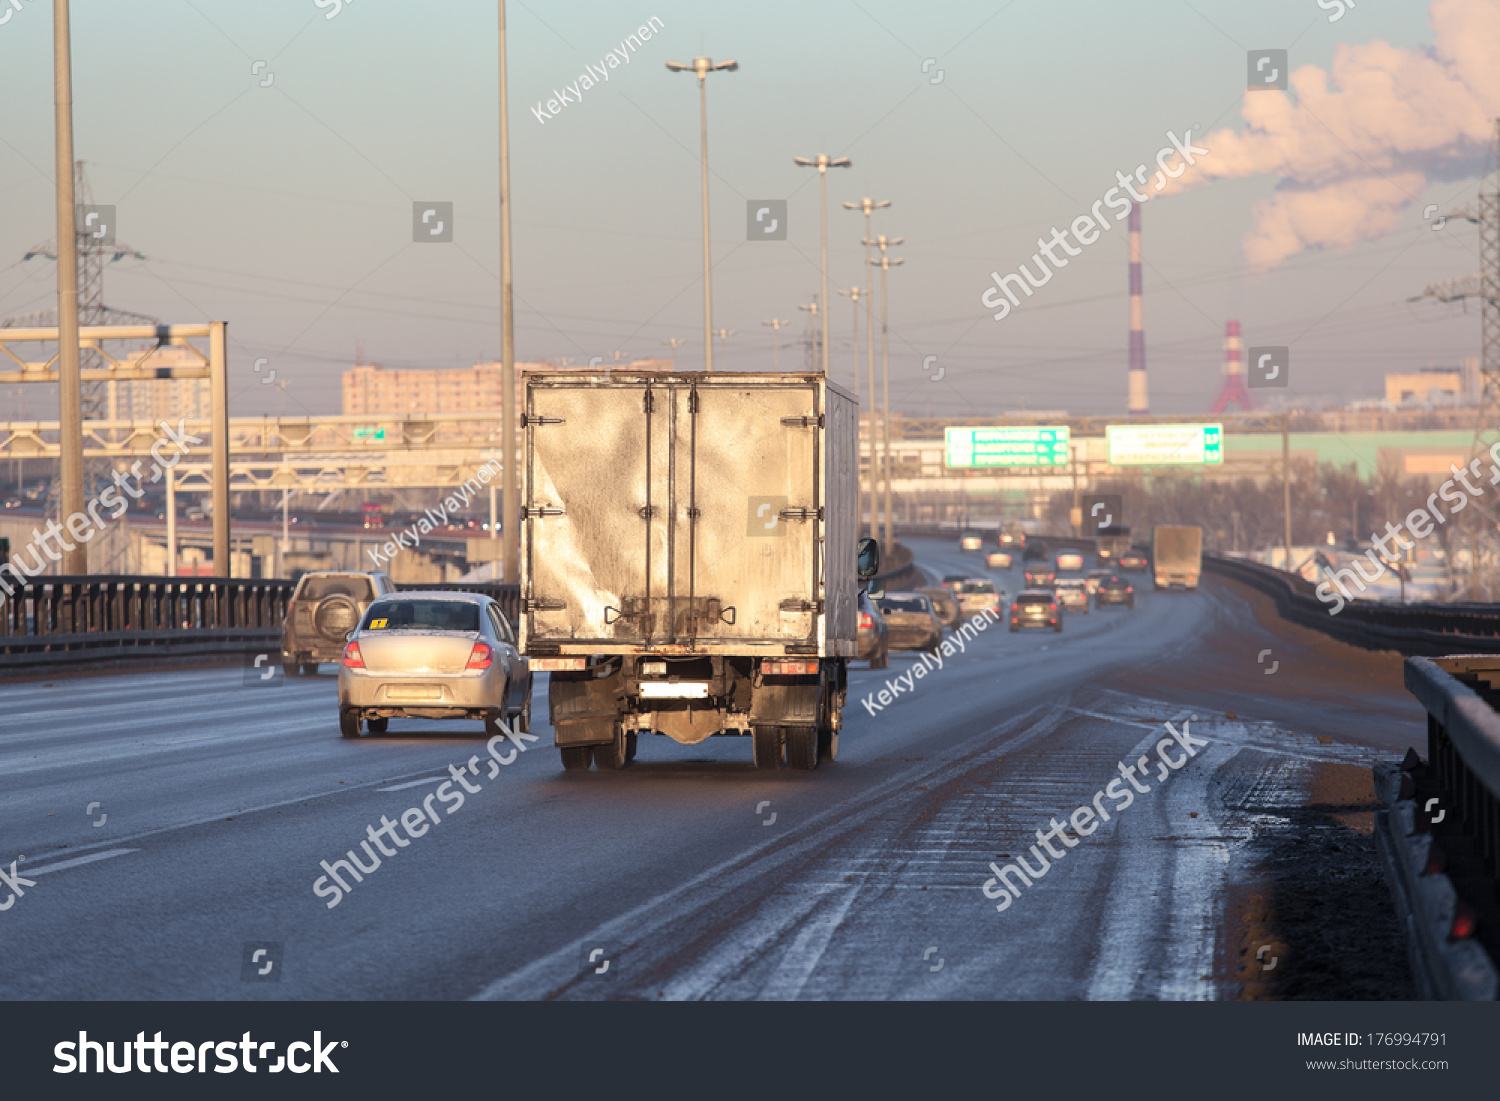 Freight truck on the city highway #176994791